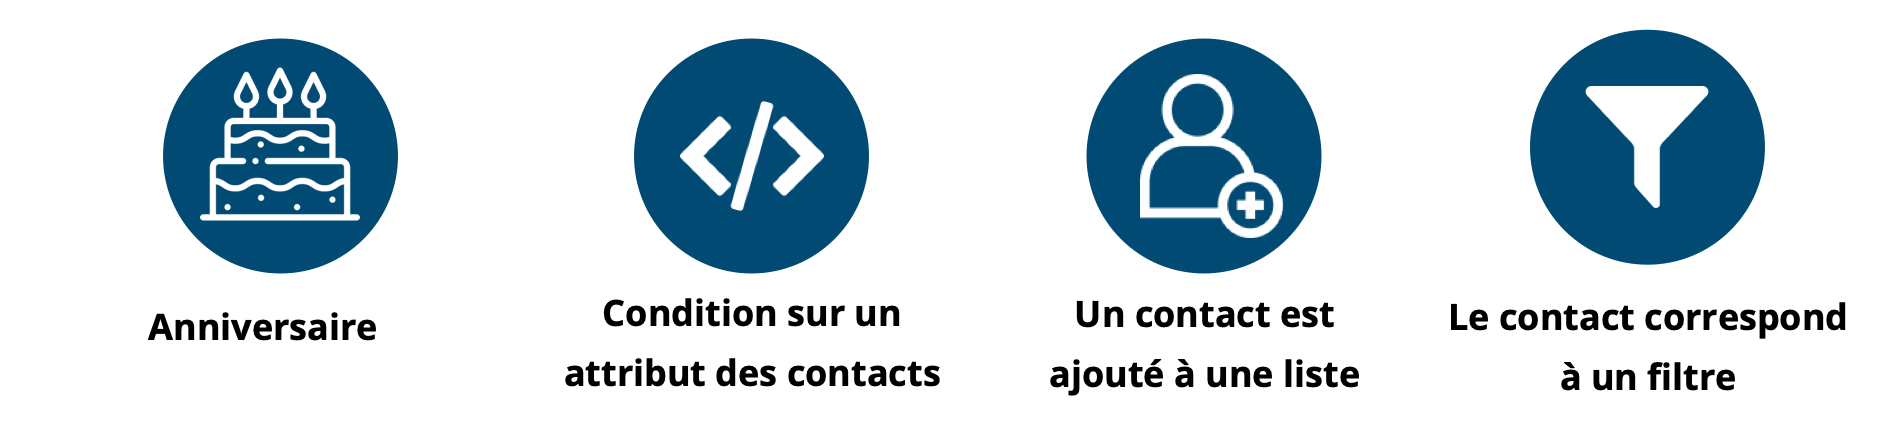 Contact_details_FR.png